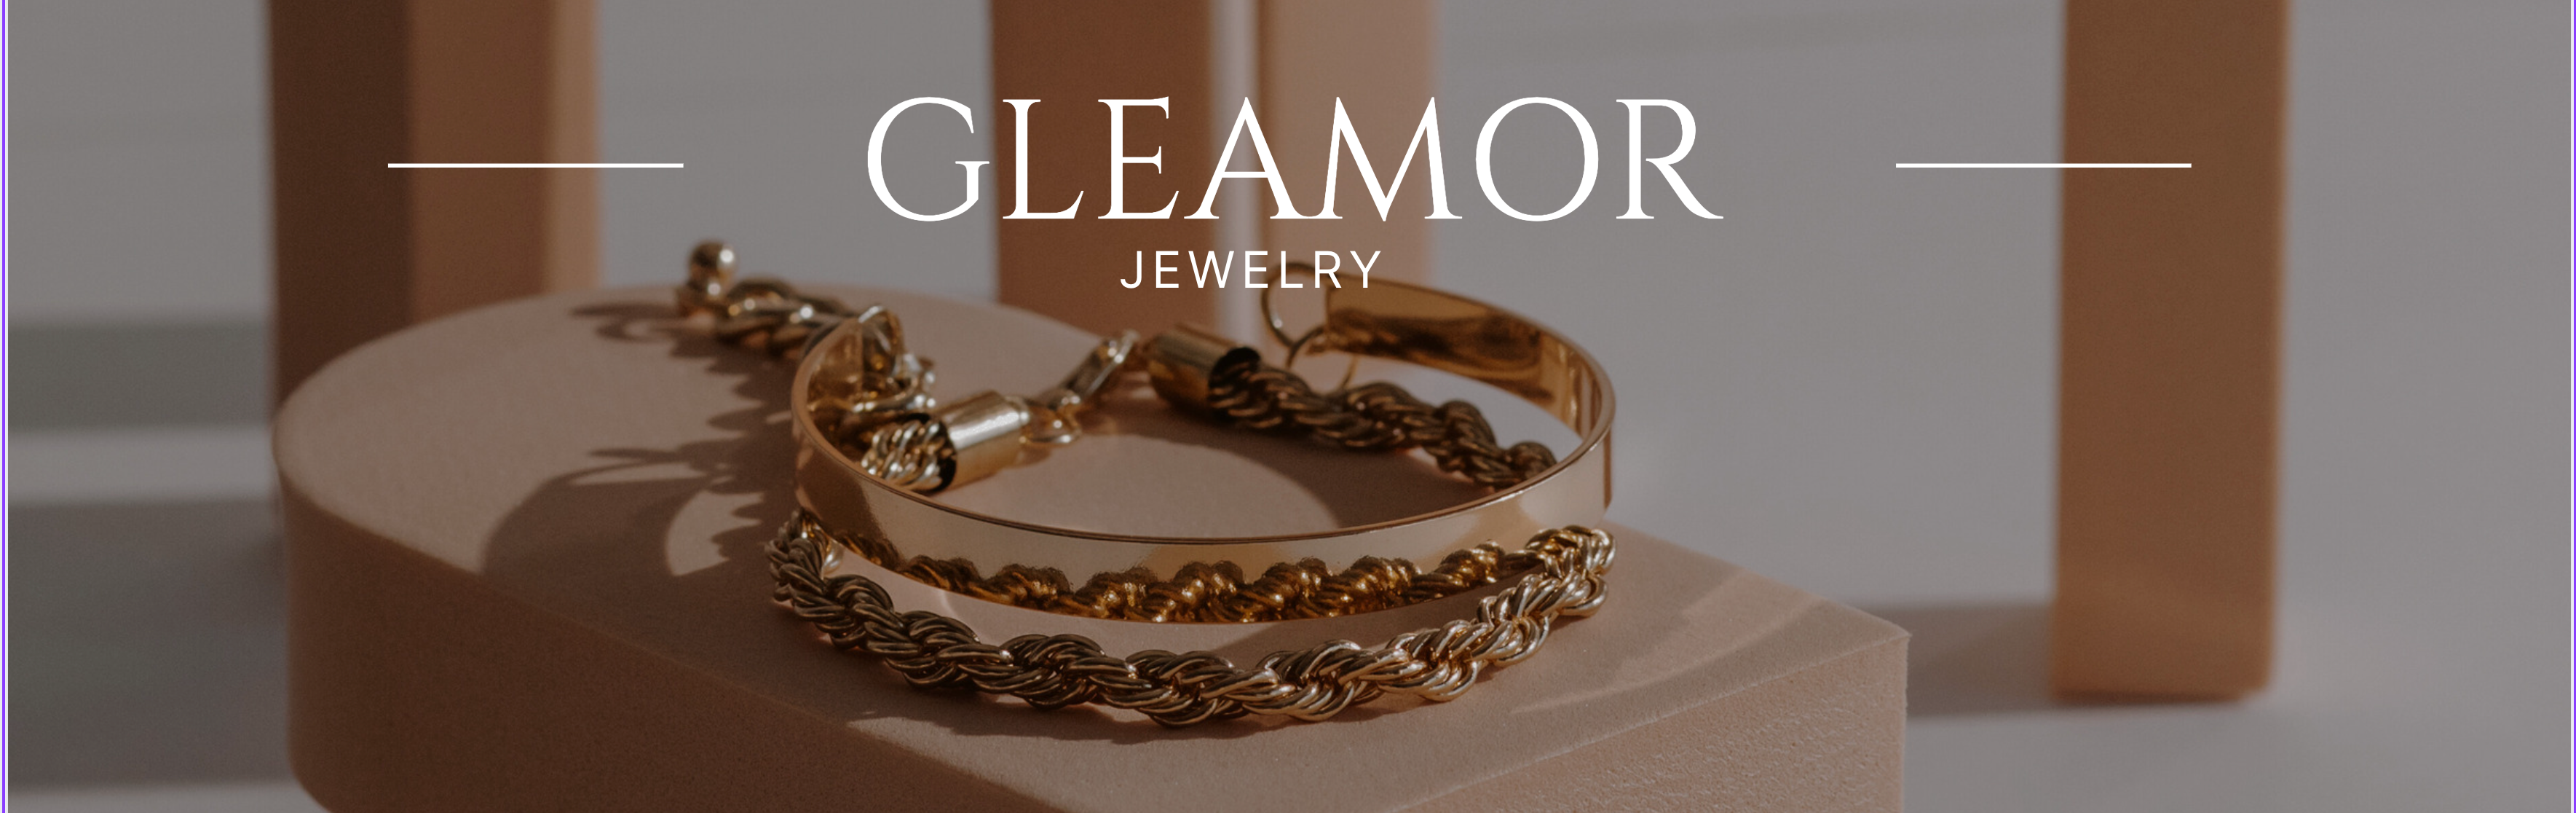 Jewelry store Gleamor. Exquisite jewelry, gift ideas. Rings, earrings, necklaces, bracelets